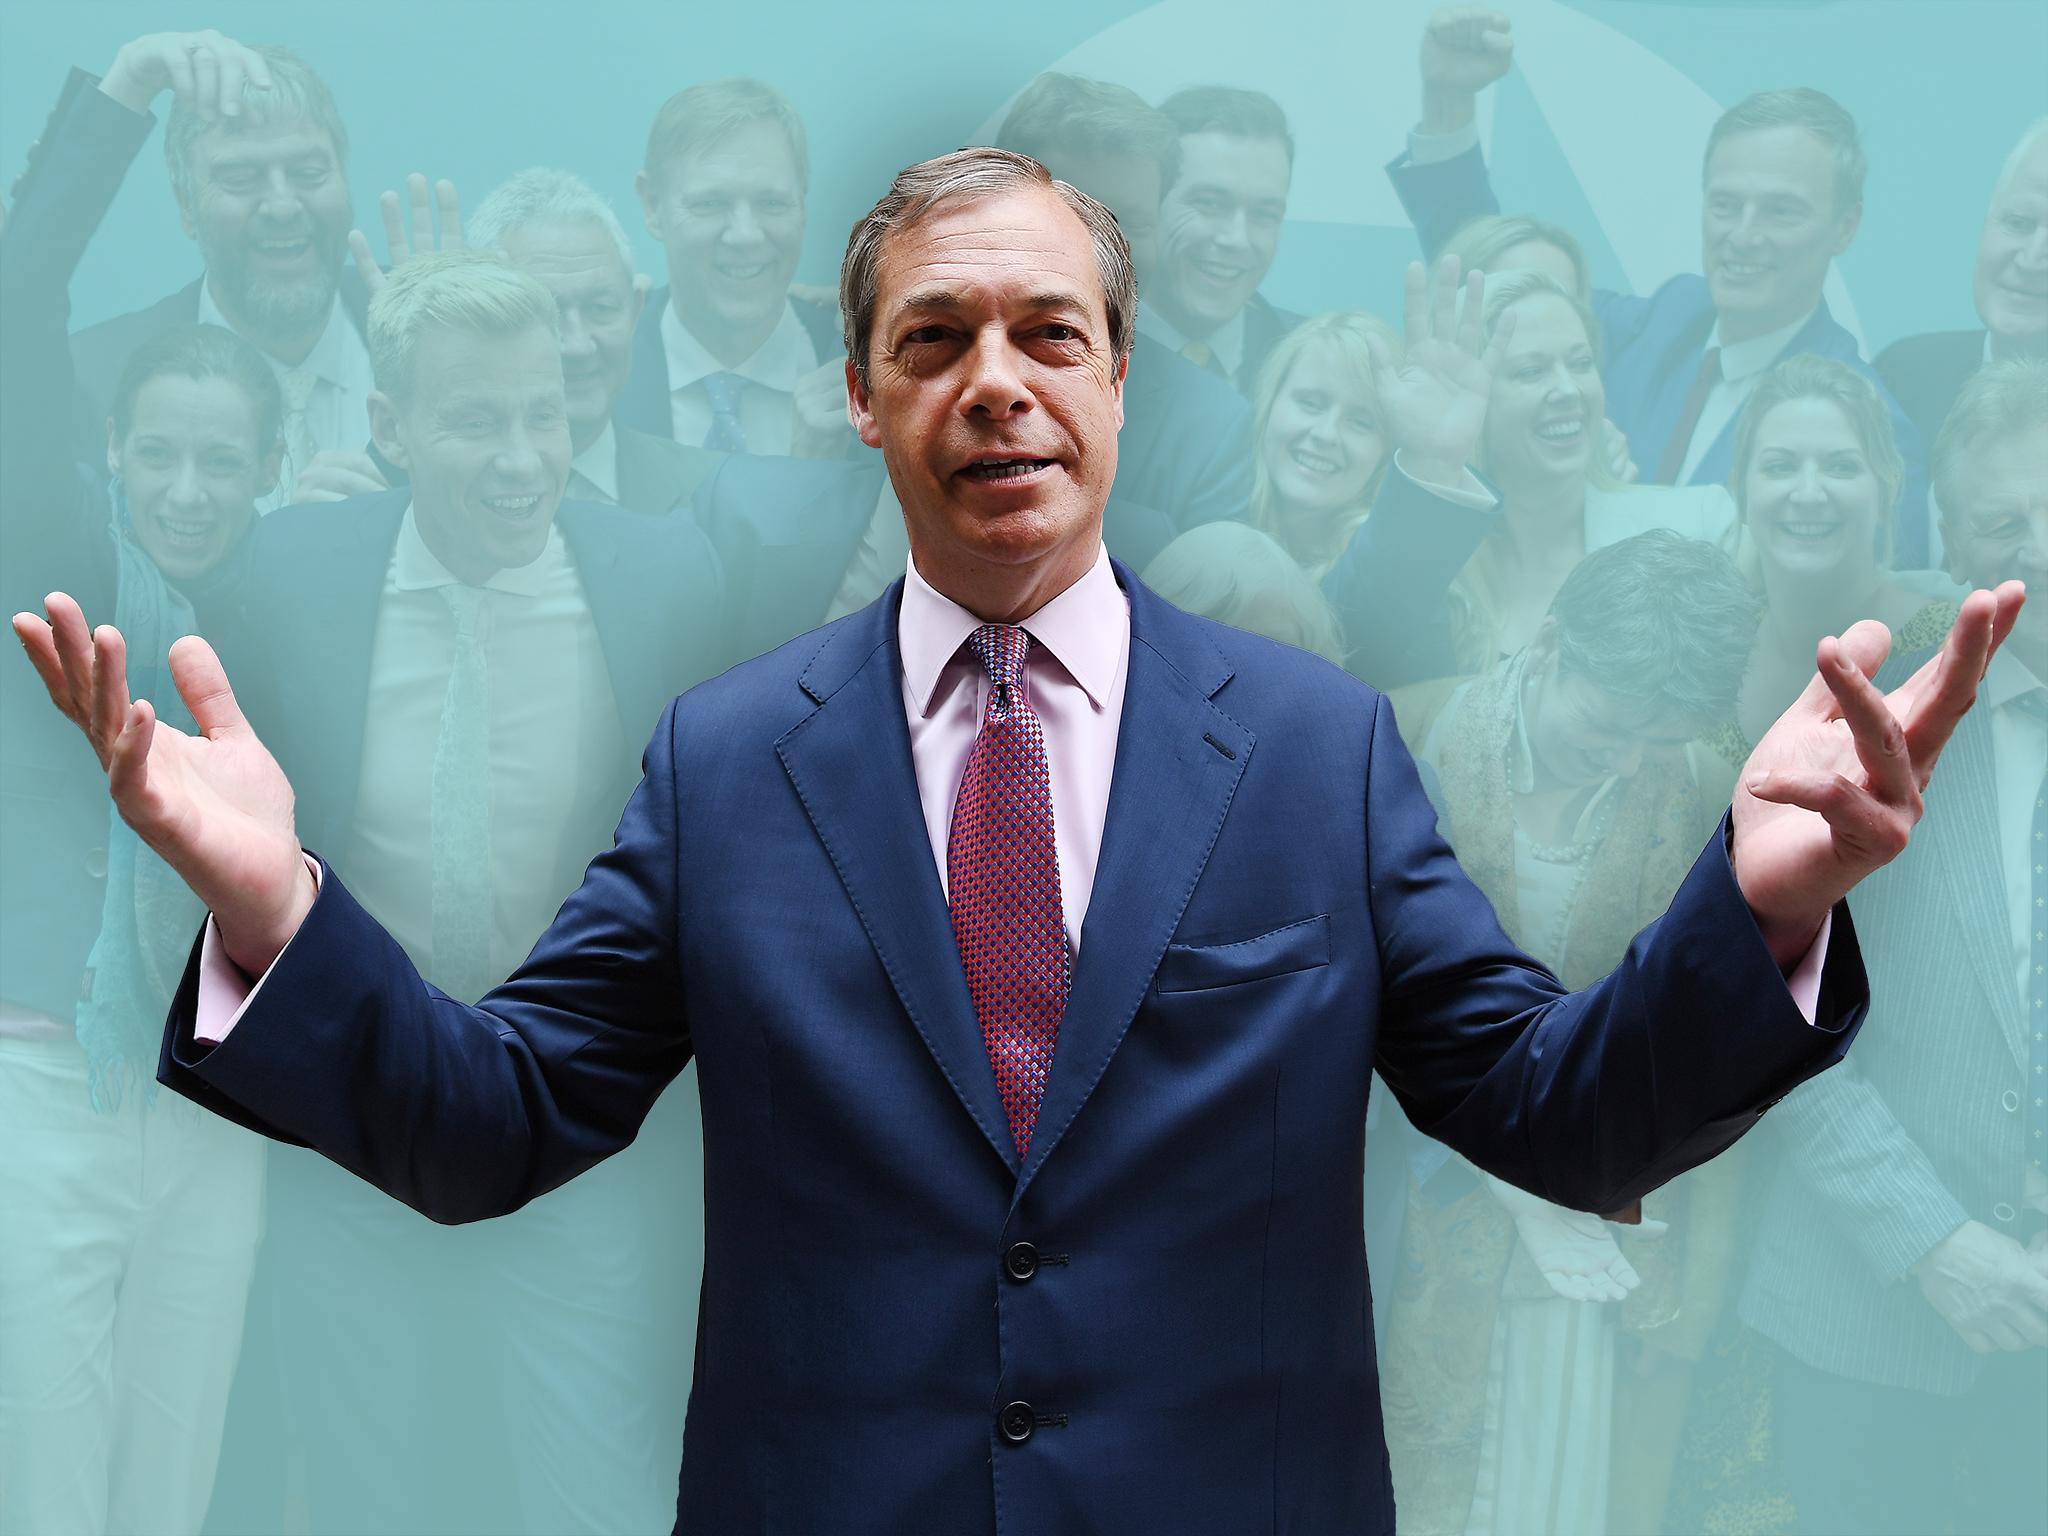 Is the Brexit Party leader not going anywhere, or is he not going anywhere?